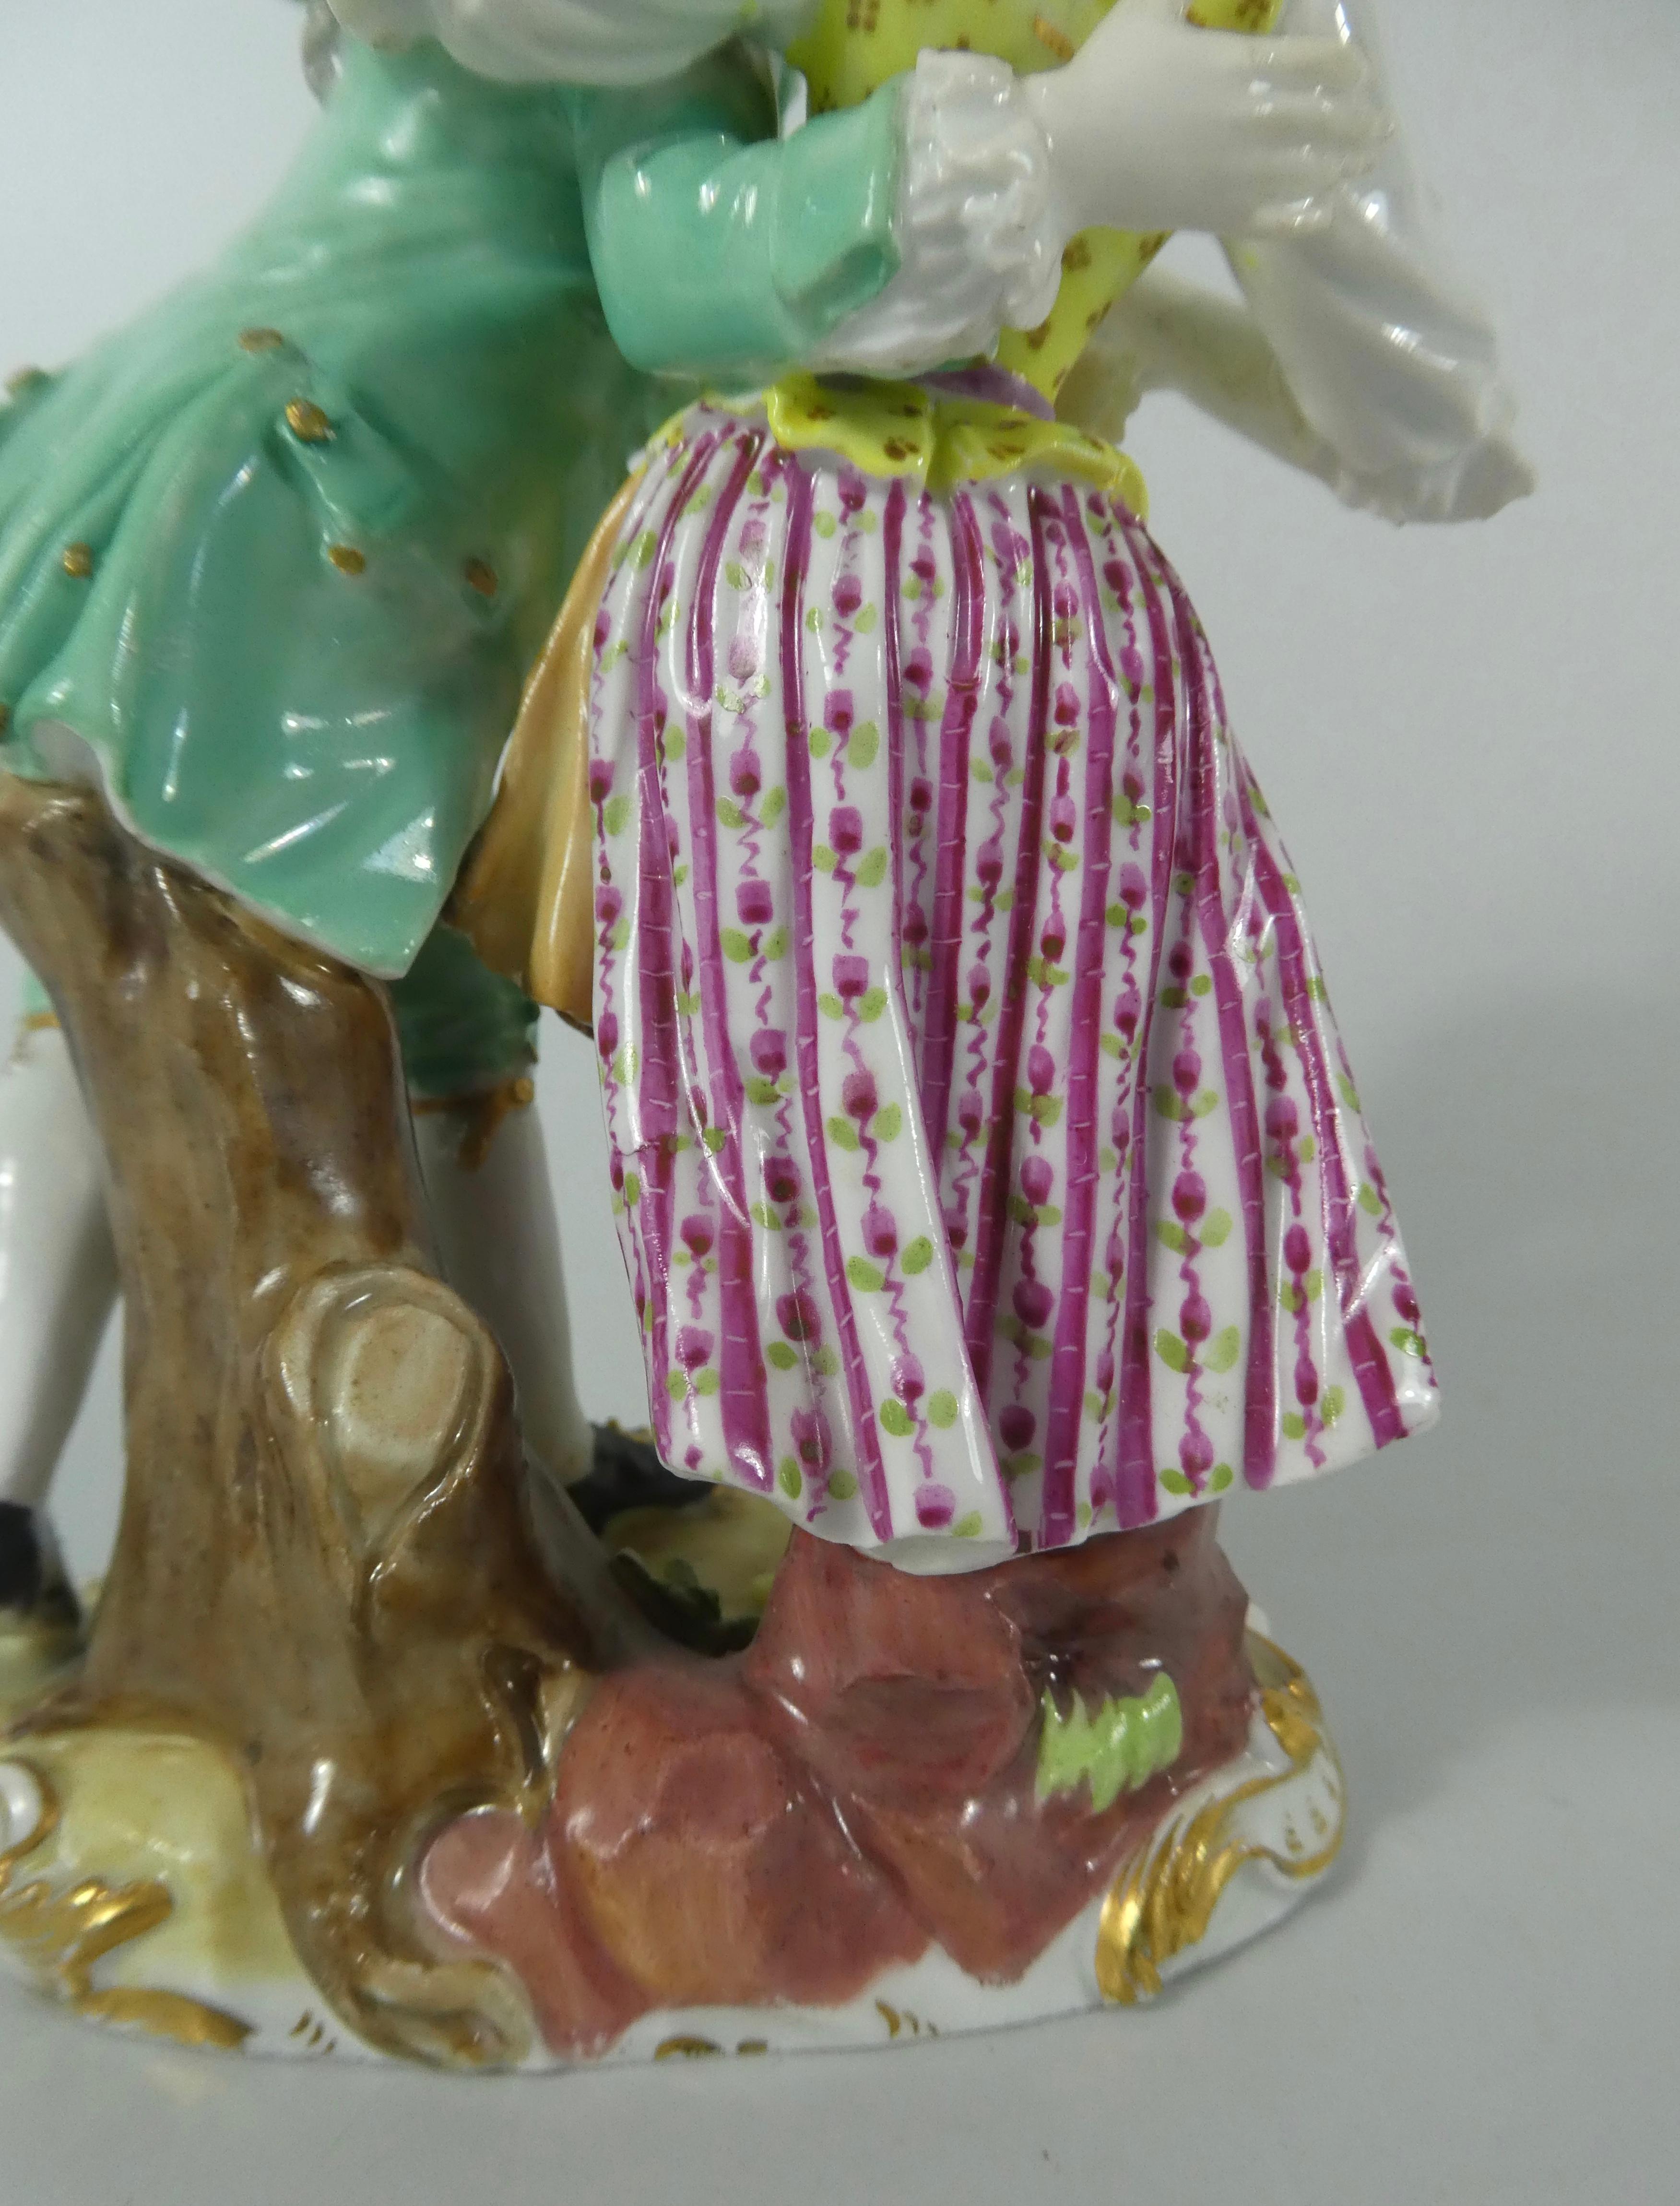 Fired Meissen Porcelain Group of Dancers, circa 1770